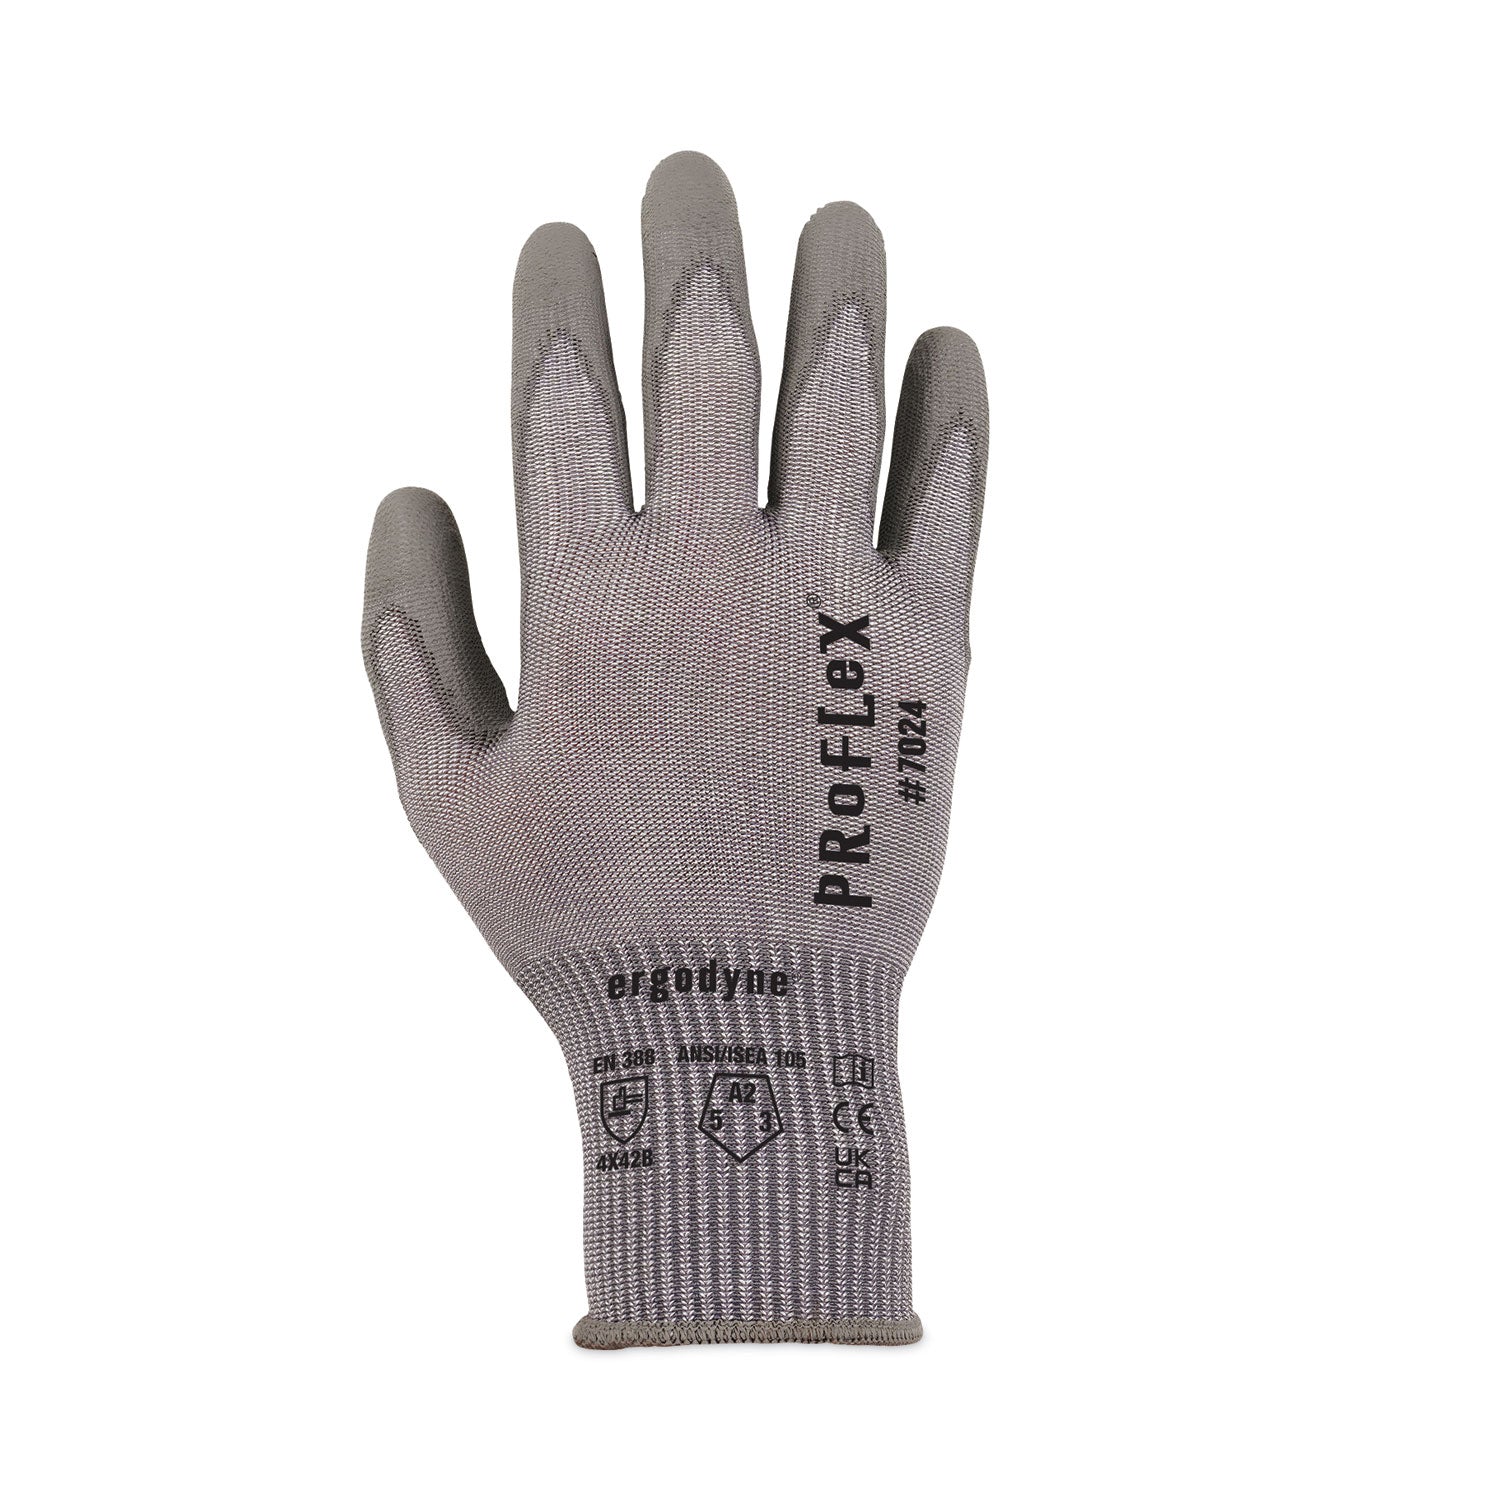 proflex-7024-ansi-a2-pu-coated-cr-gloves-gray-medium-pair-ships-in-1-3-business-days_ego10403 - 1